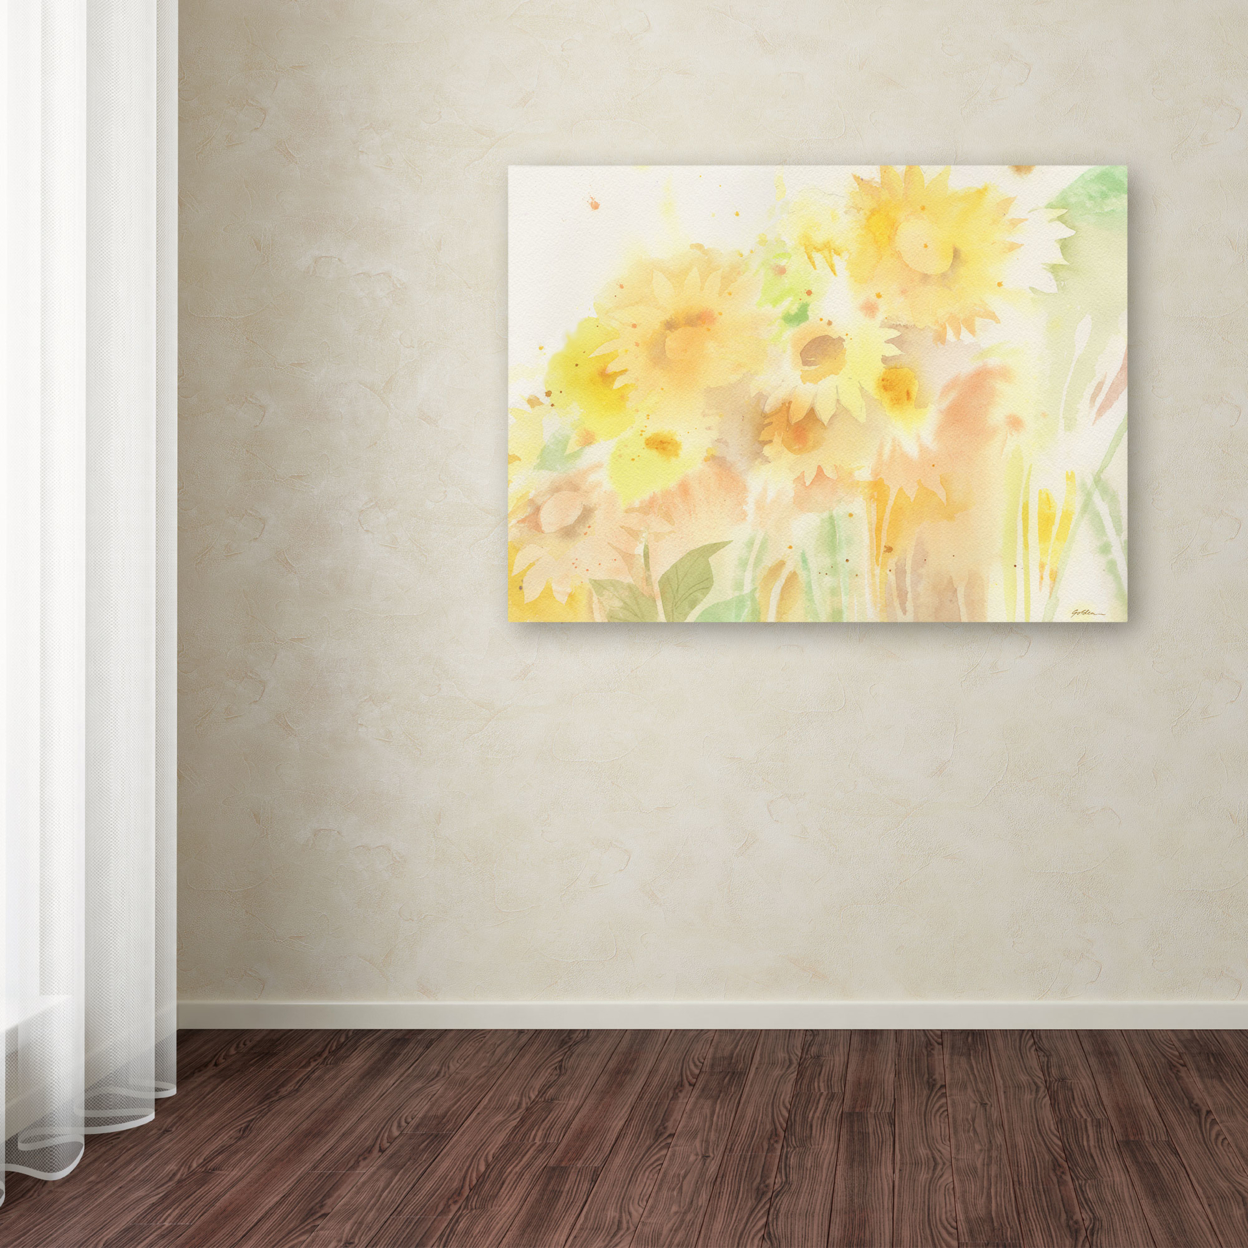 Sheila Golden 'Amid Sunflowers' Canvas Wall Art 35 X 47 Inches